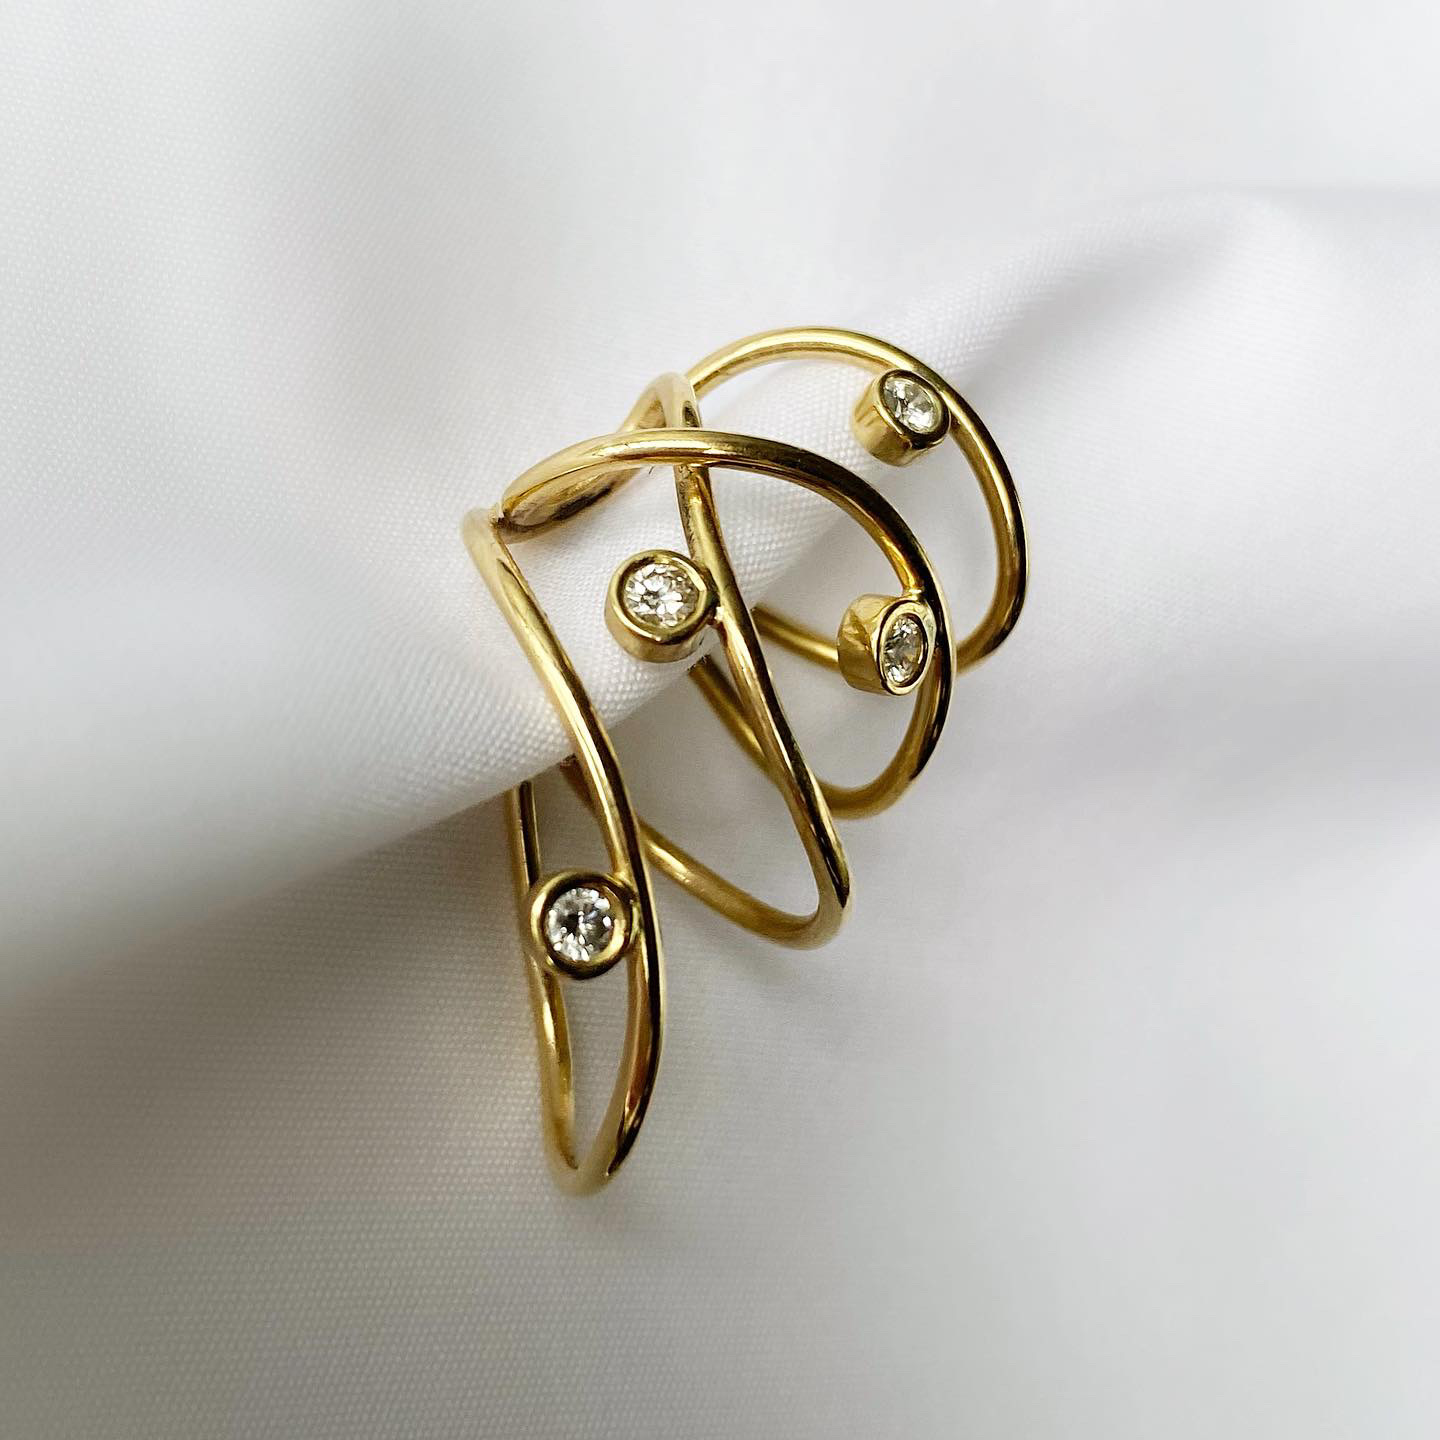 Bespoke Mimma Ear Cuff in 18kt Yellow Gold and Diamonds. Image Courtesy of S Faurschou